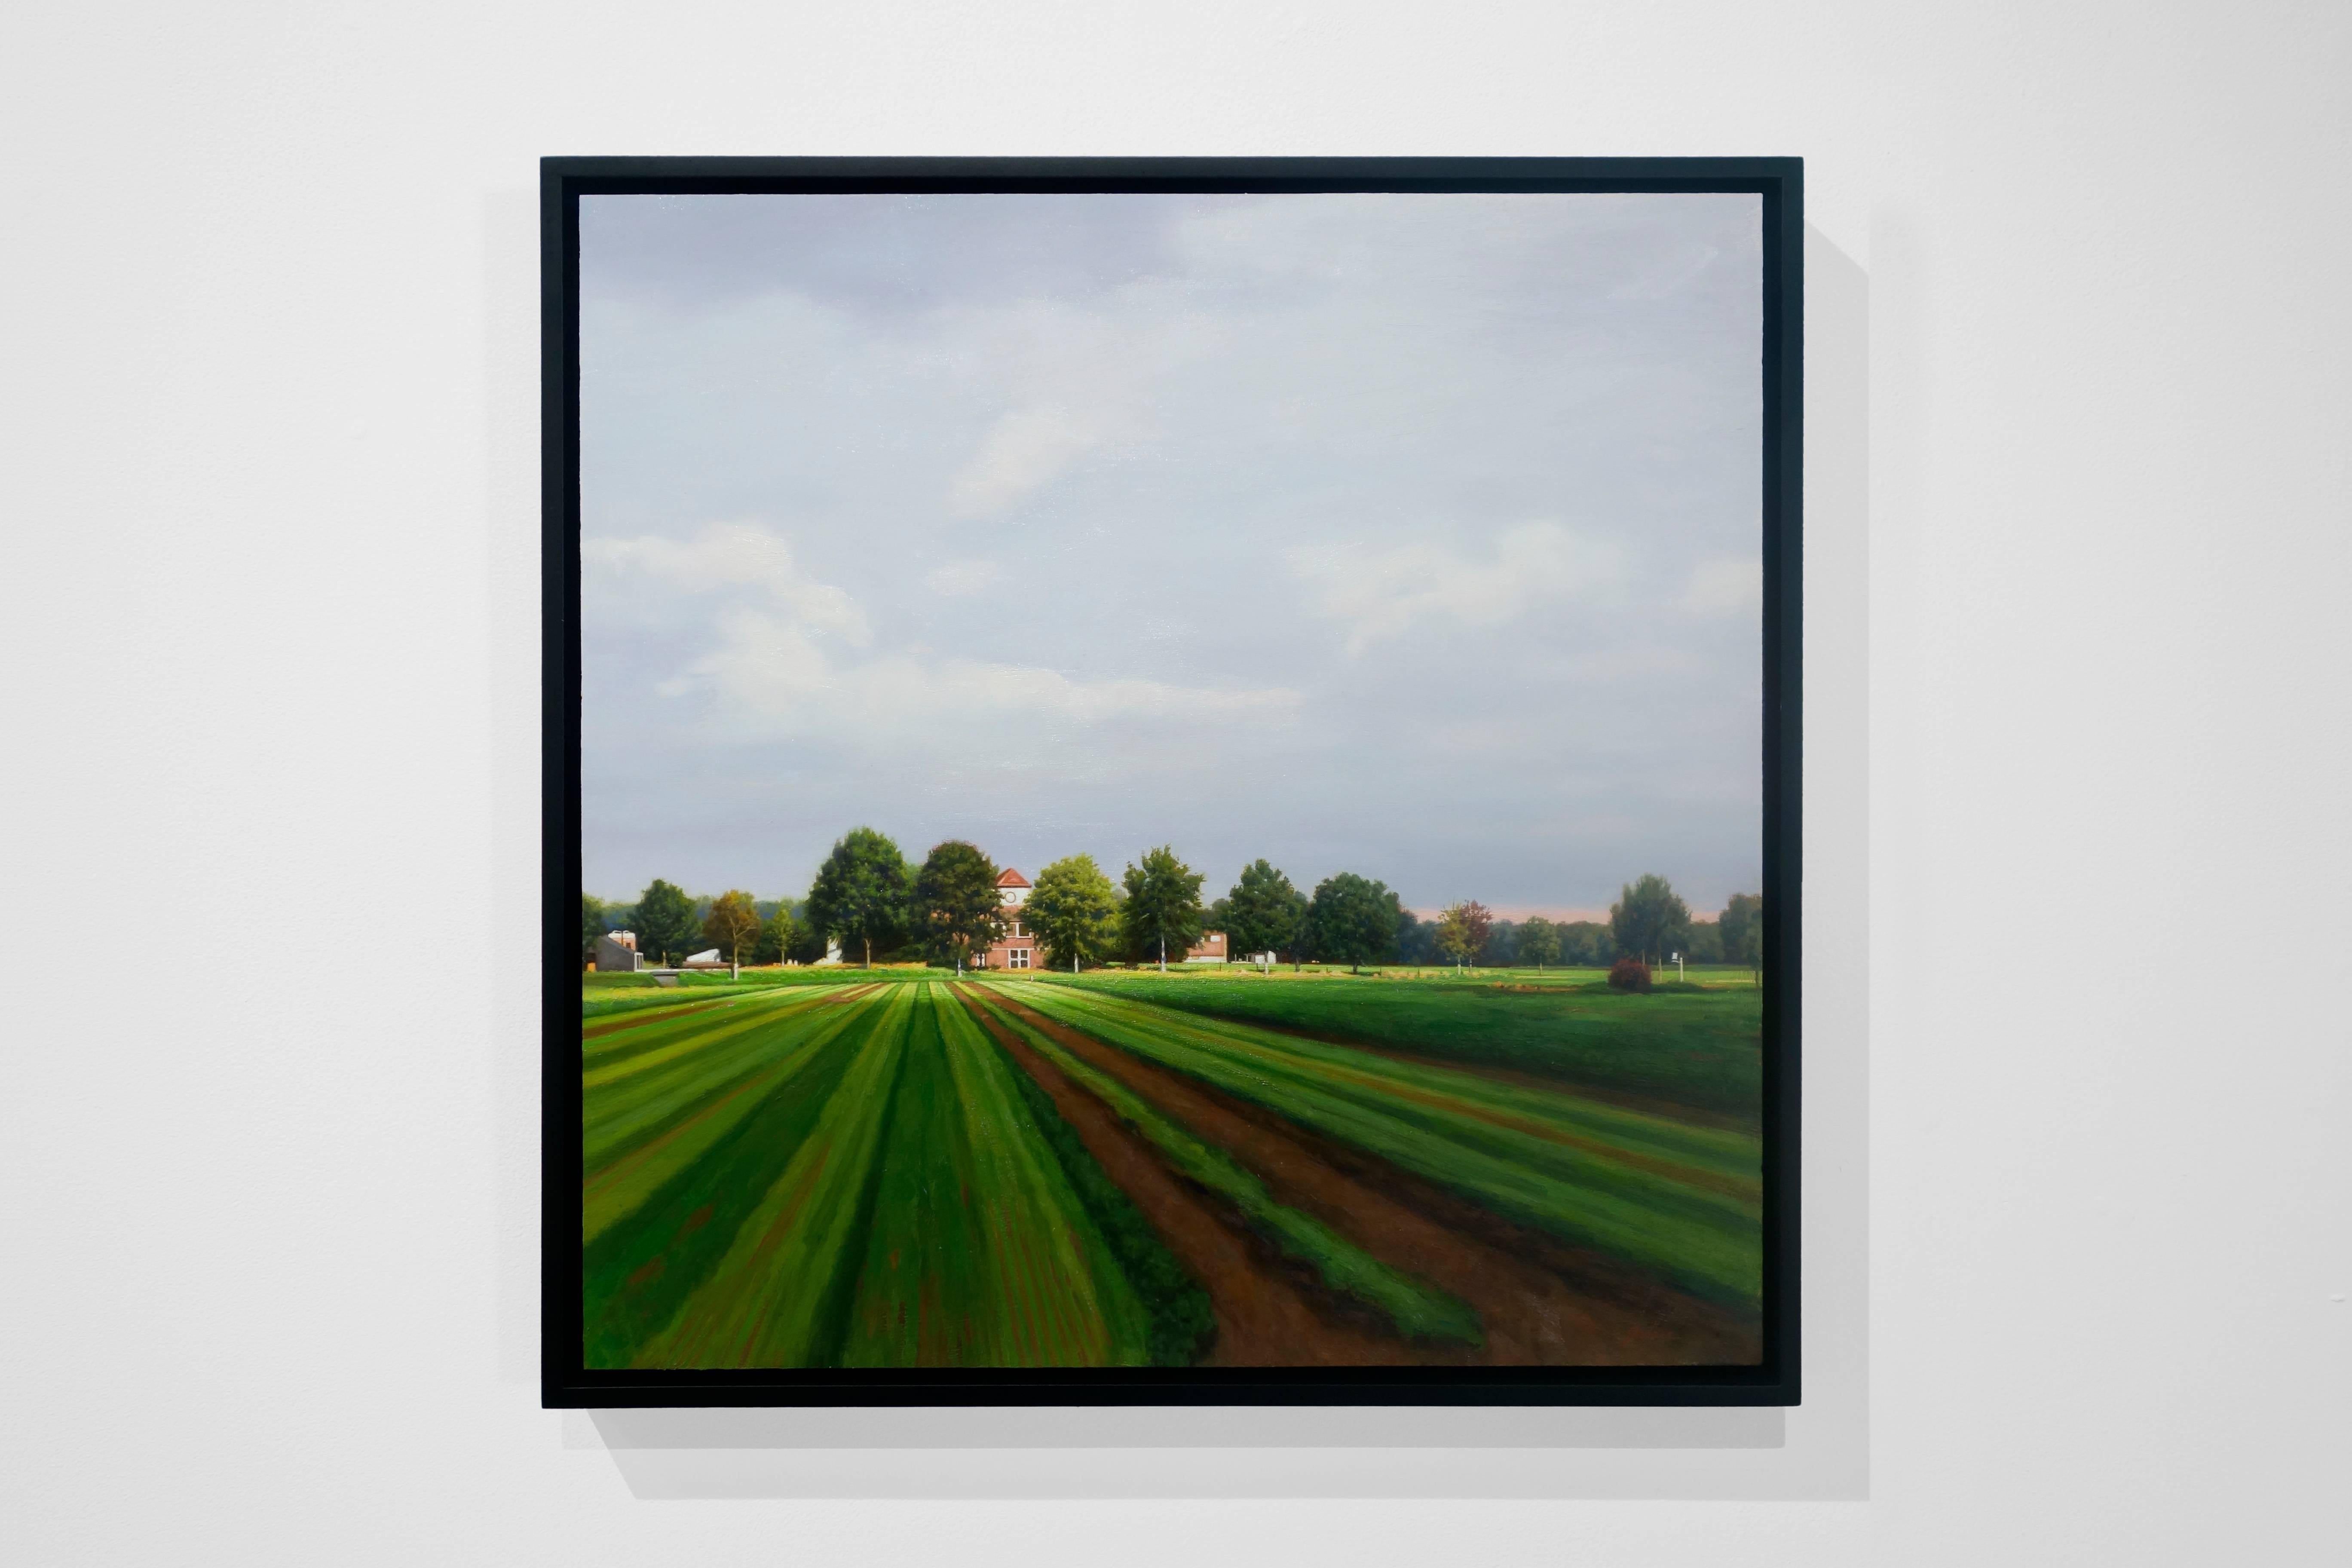 DUTCH STRIPES, hyper-realistic landscape, bright green, open field, cloudy skies - Painting by Gary Godbee